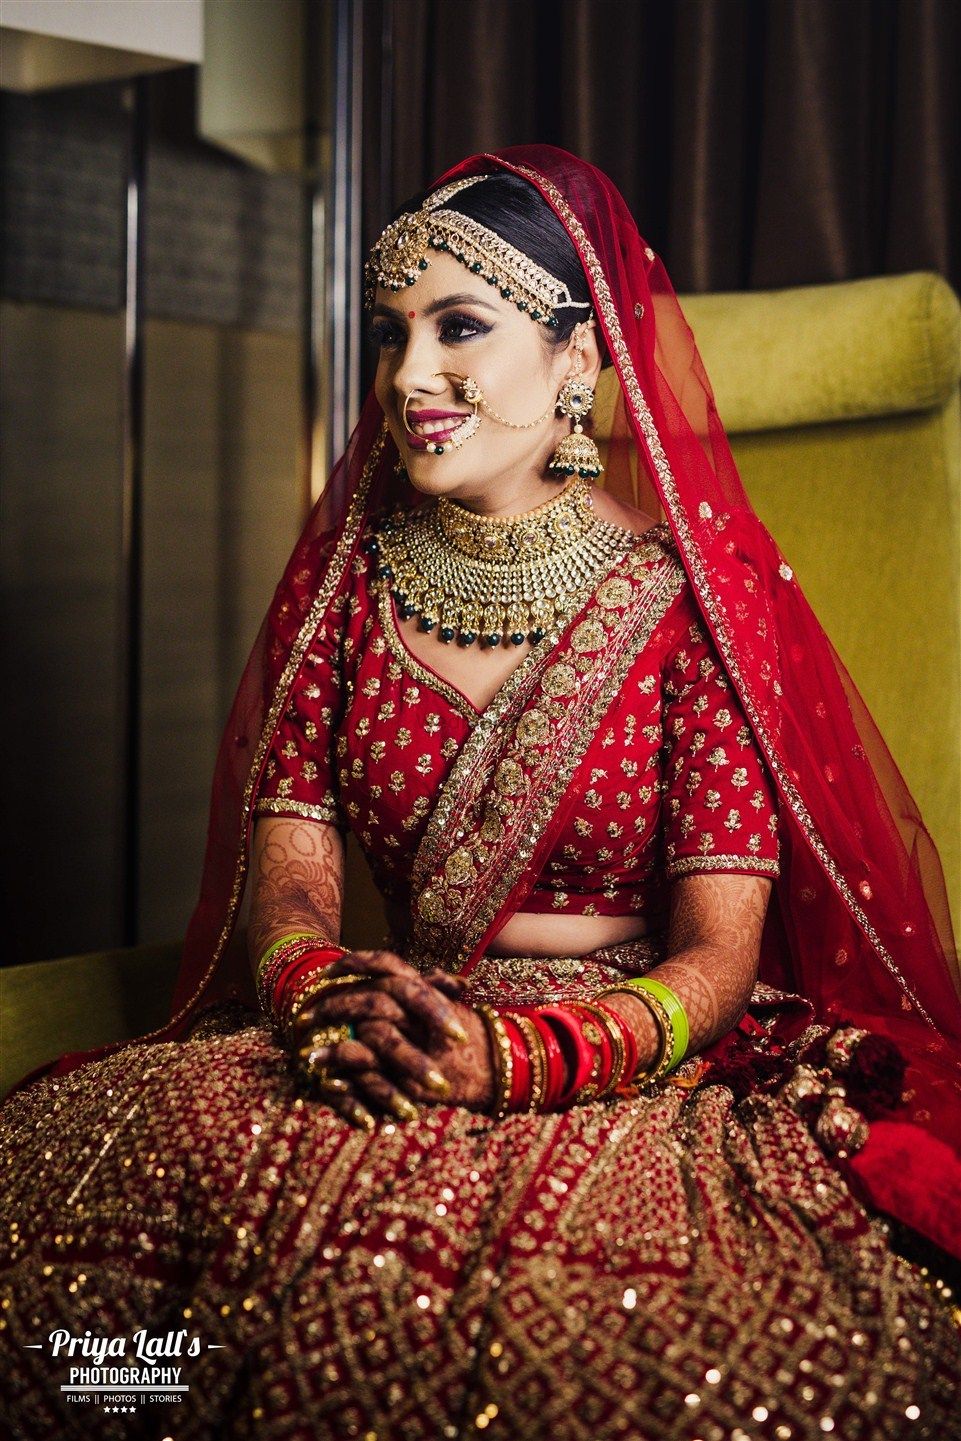 Photo of A bride in a red lehenga and gold jewelry for her wedding